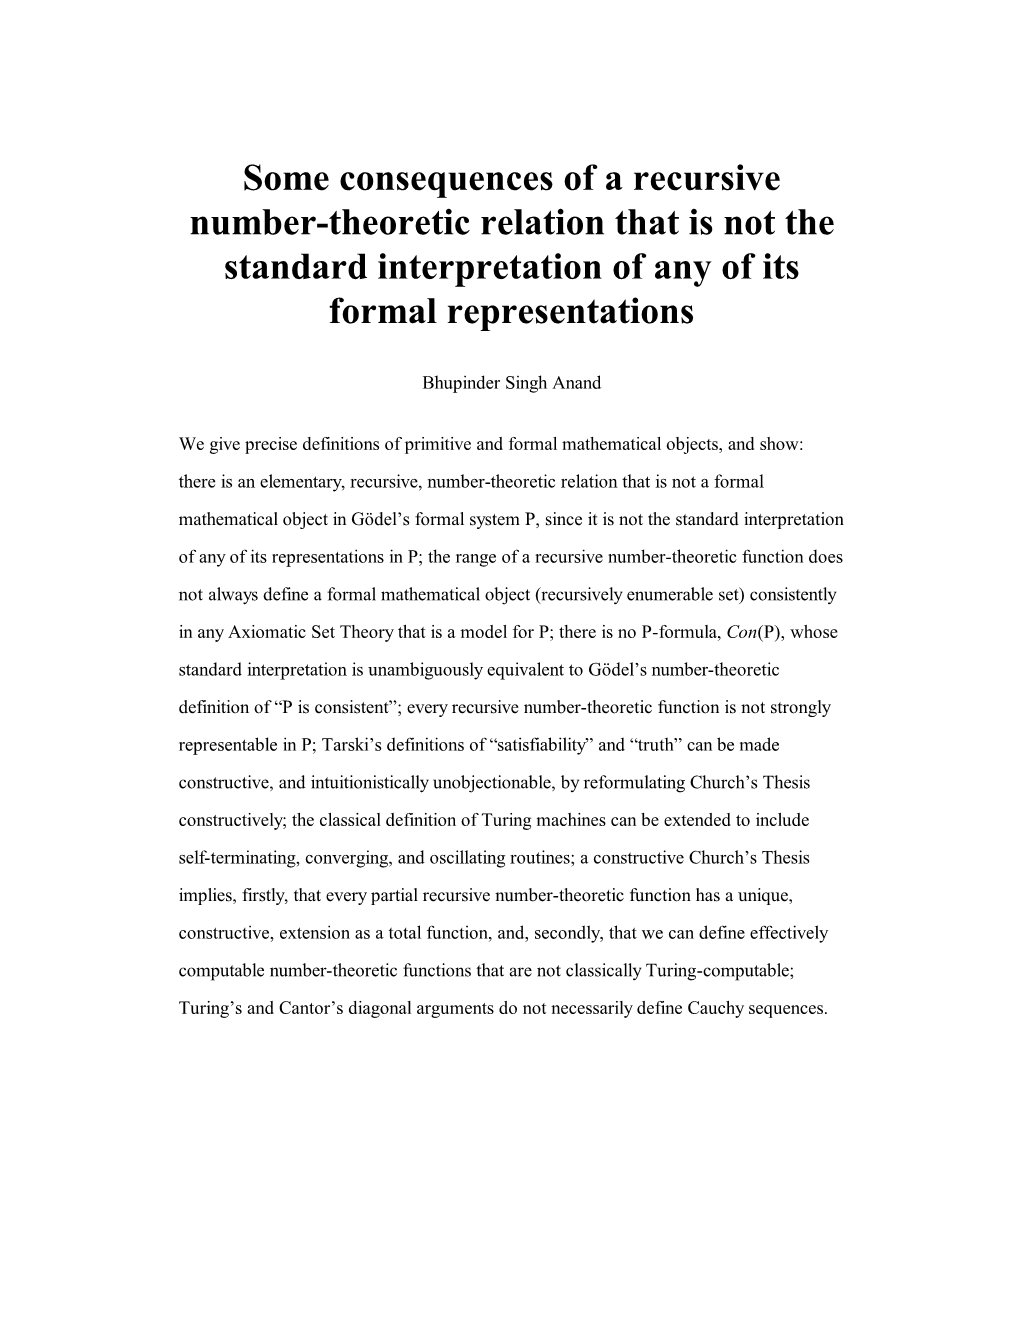 Some Consequences of a Recursive Number-Theoretic Relation That Is Not the Standard Interpretation of Any of Its Formal Representations